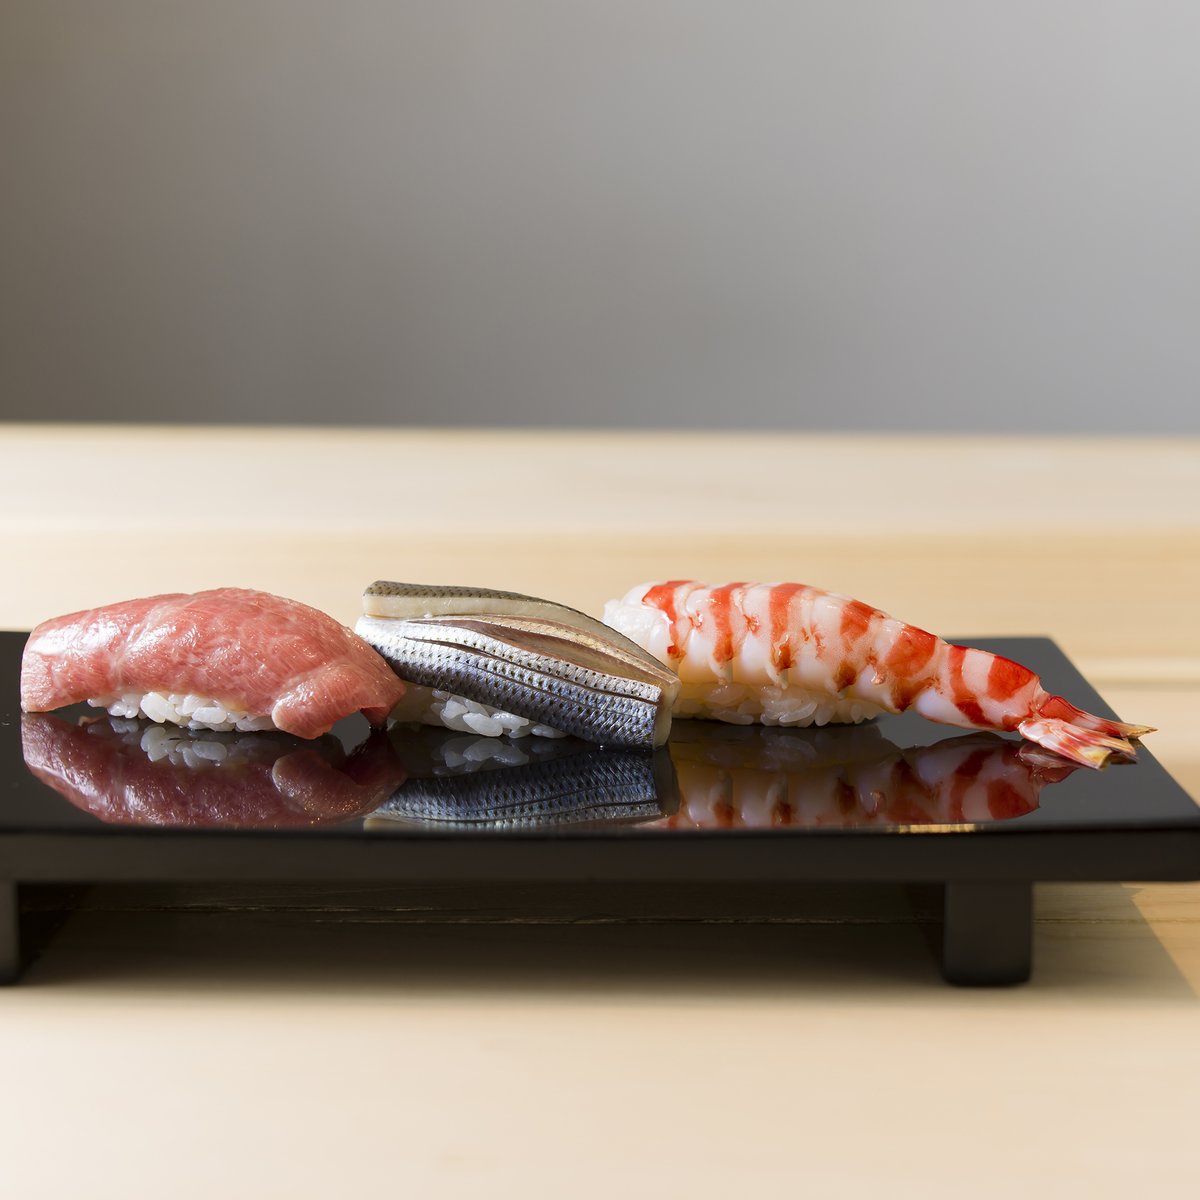 Our full-time six-month course provides a comprehensive range of skills and knowledge, encompassing basic proficiency to the operational skills required for running your own Japanese restaurant.

Find out more: ow.ly/ZjUJ50RbceZ

#Japanese #Cuisine #Sushi #Washoku